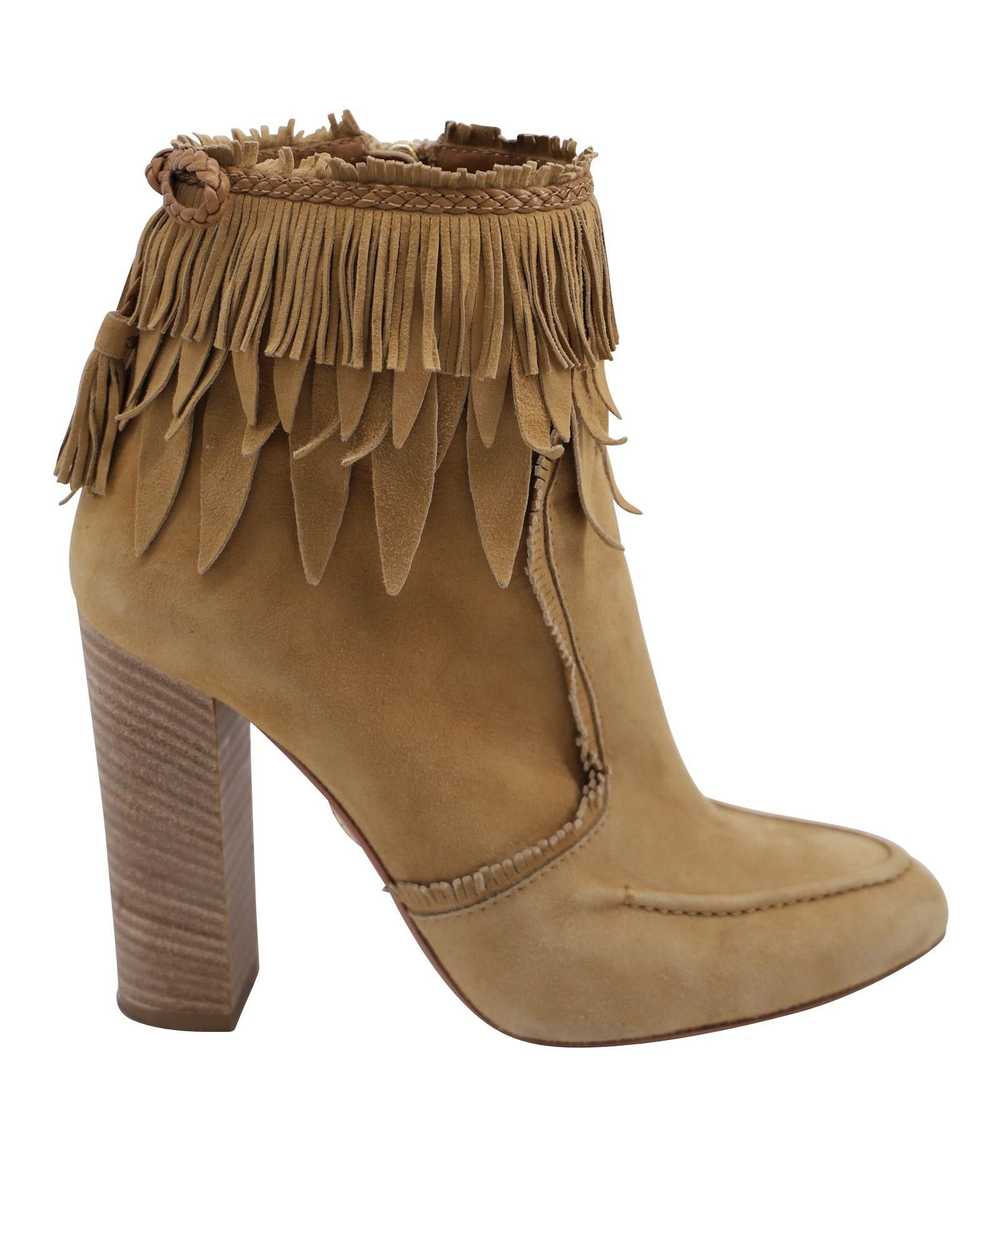 Aquazzura Fringed Beige Suede Ankle Boots with Bl… - image 1